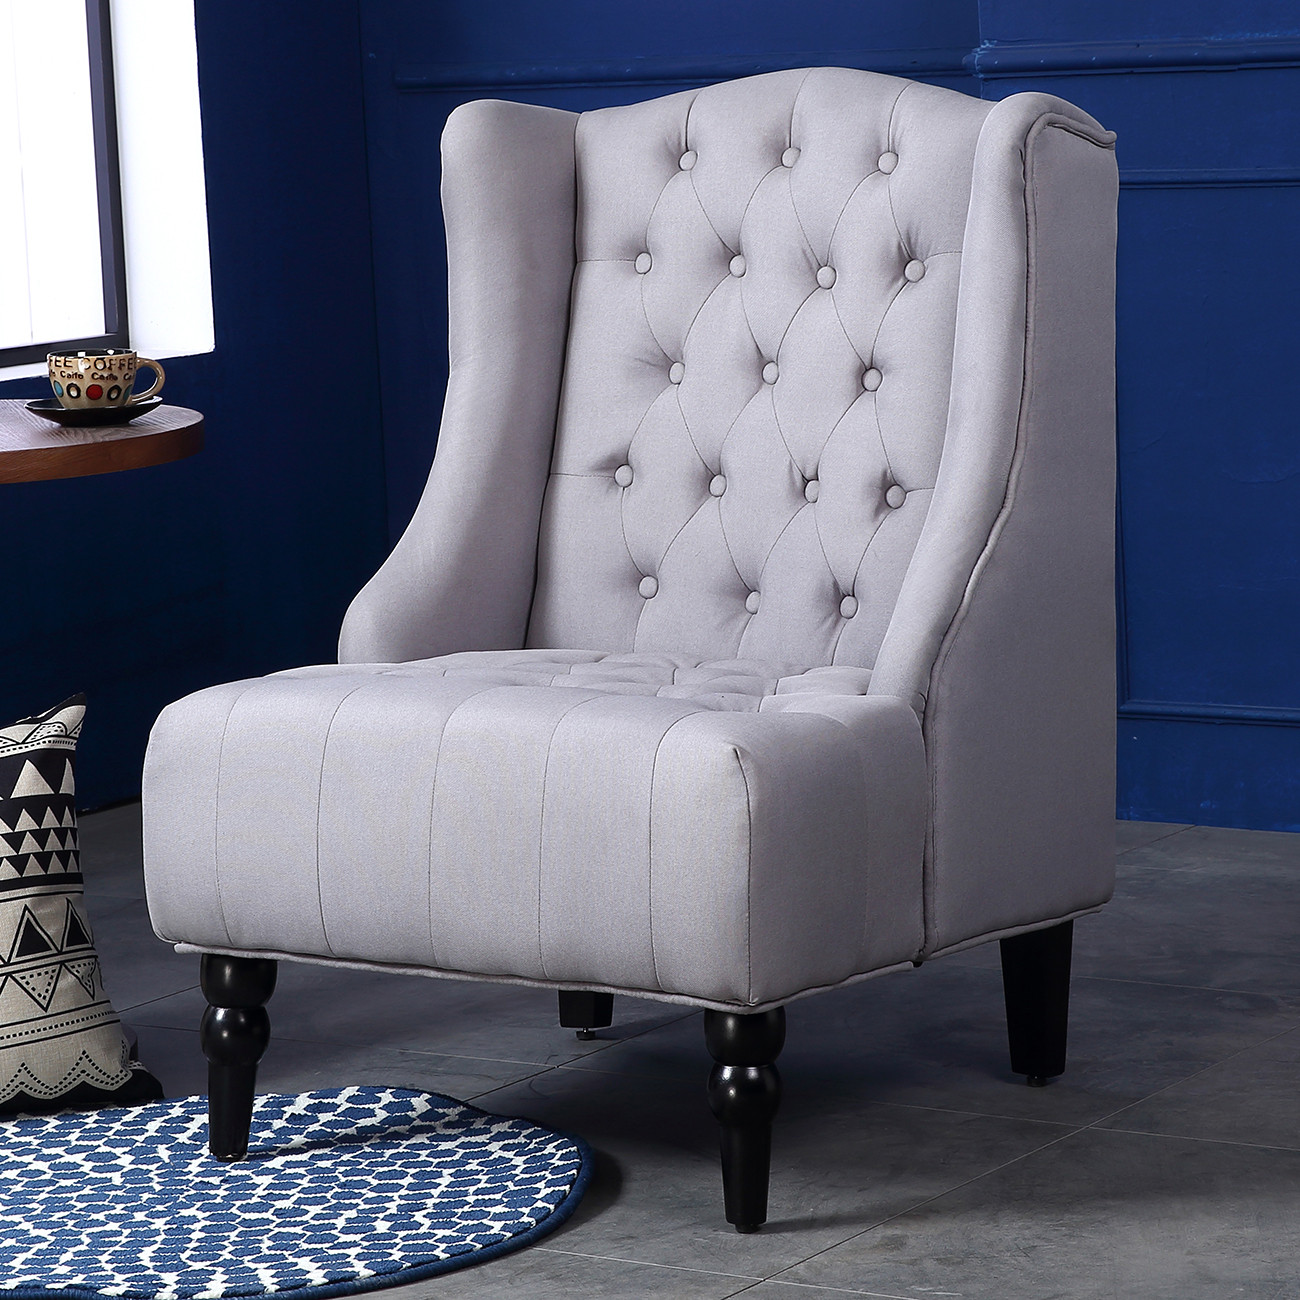 Wing Chairs For Living Room
 Wingback Accent Chair Tall High back Living Room Tufted